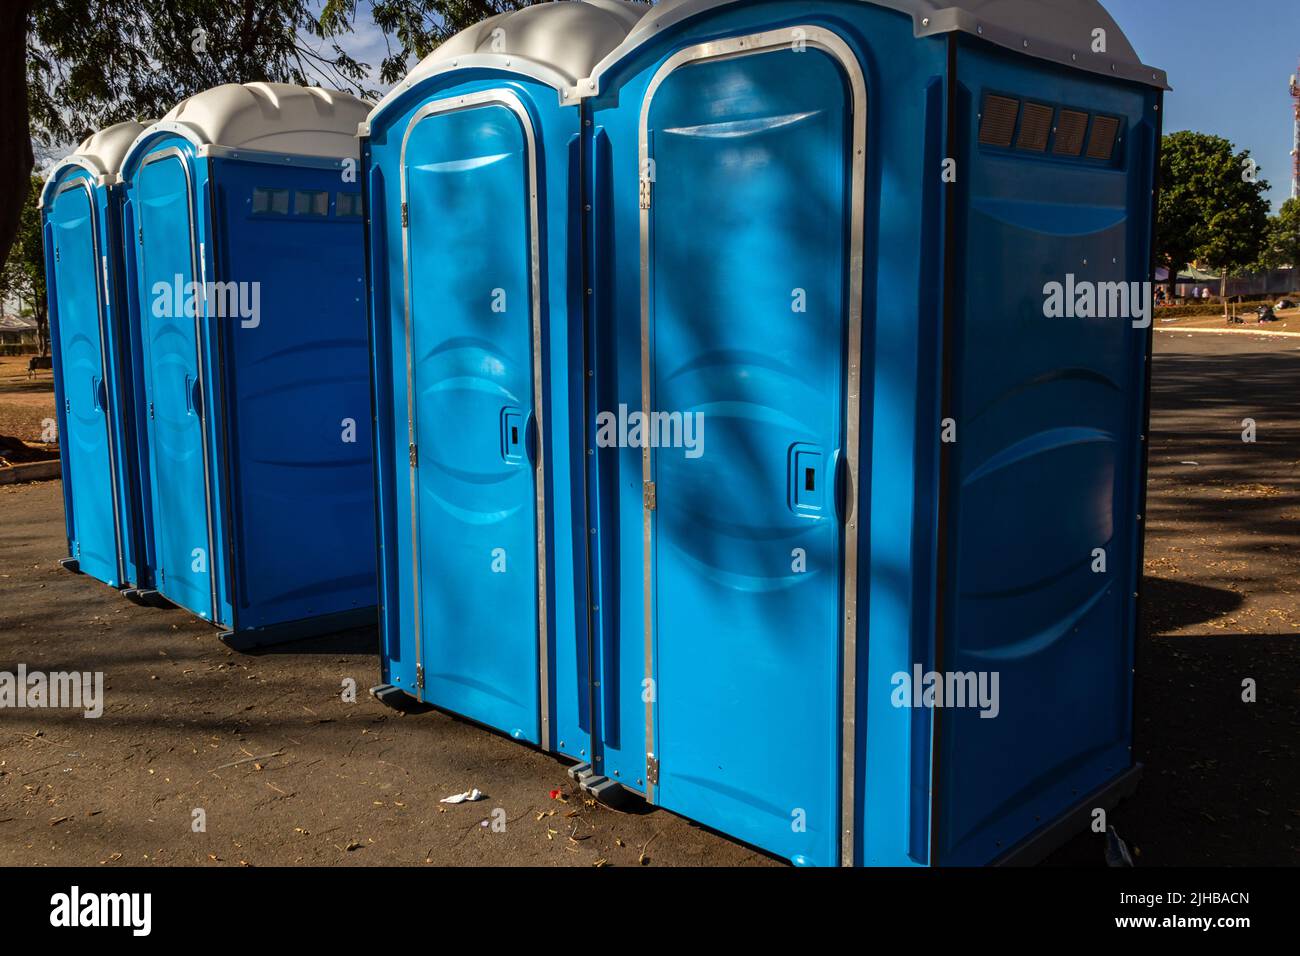 Goiania, Goiás, Brazil – July 17, 2022:  A few chemical toilets lined up in a square after a public event. Stock Photo